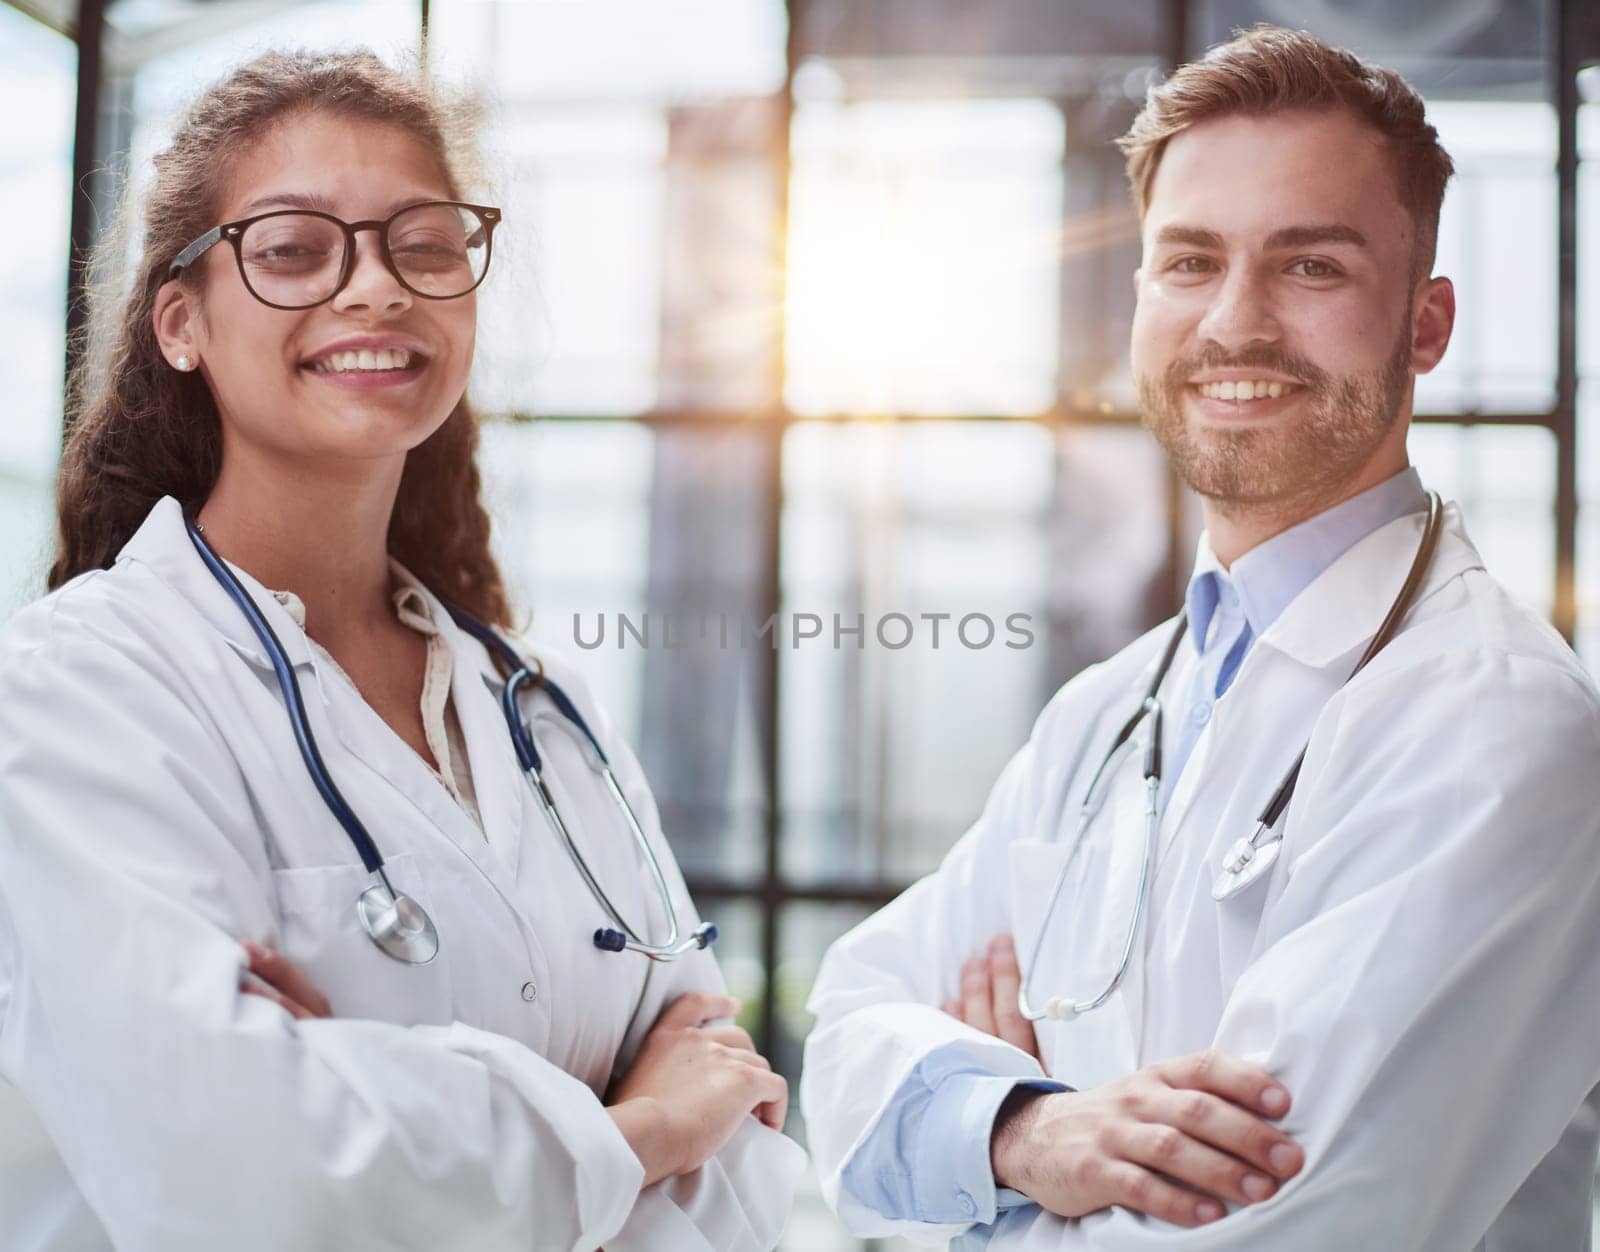 portrait of two medical workers in the hospital looking at the camera